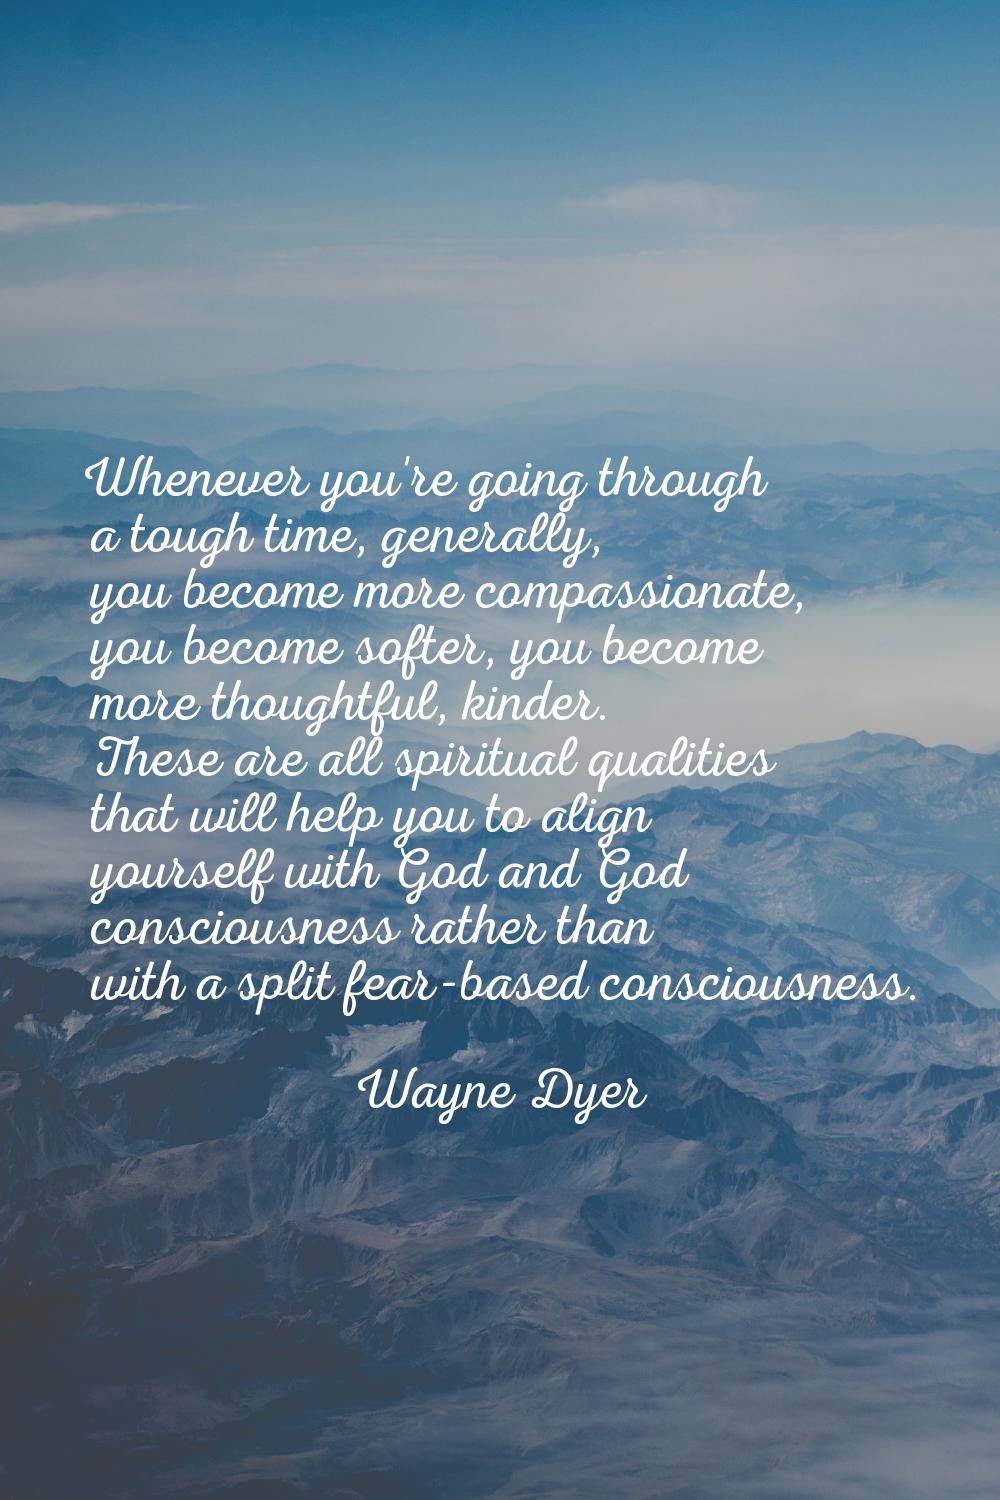 Whenever you're going through a tough time, generally, you become more compassionate, you become so